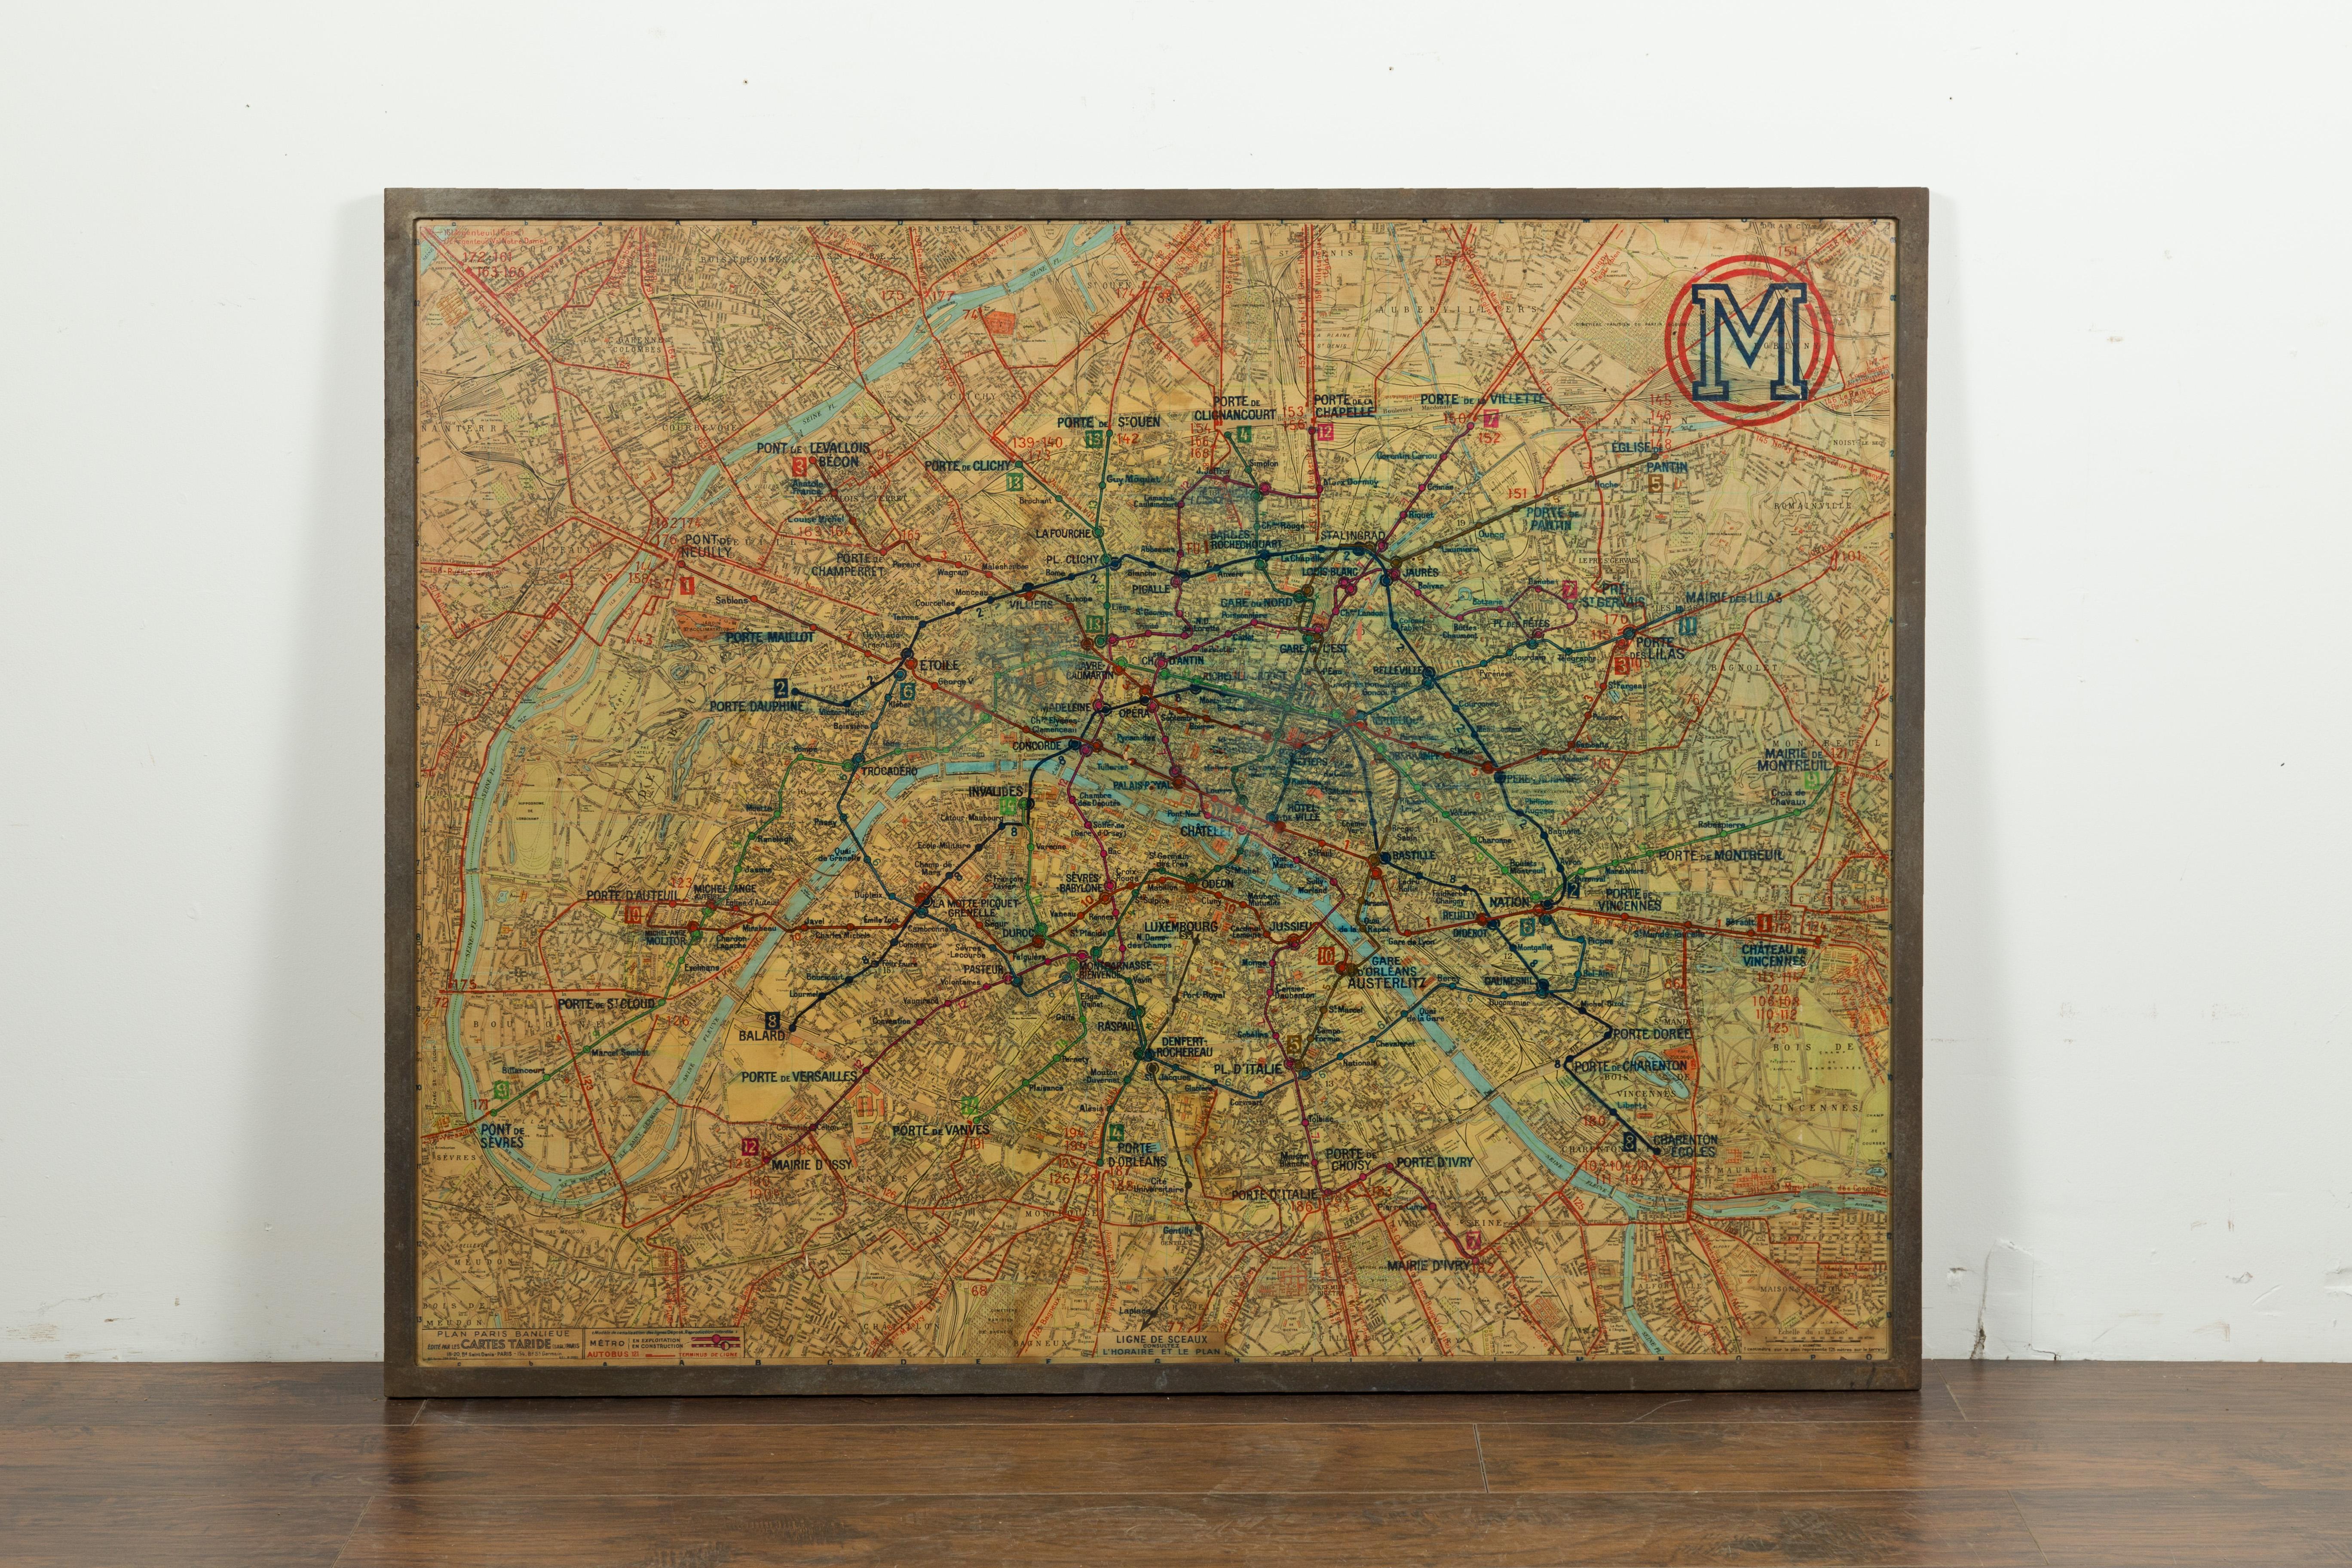 A large French framed map of the Parisian Metro from the mid-20th century, with custom iron frame. Featuring a Paris metro map from the midcentury period, this wall piece is set in a custom iron frame. Showing a nicely worn appearance, the map